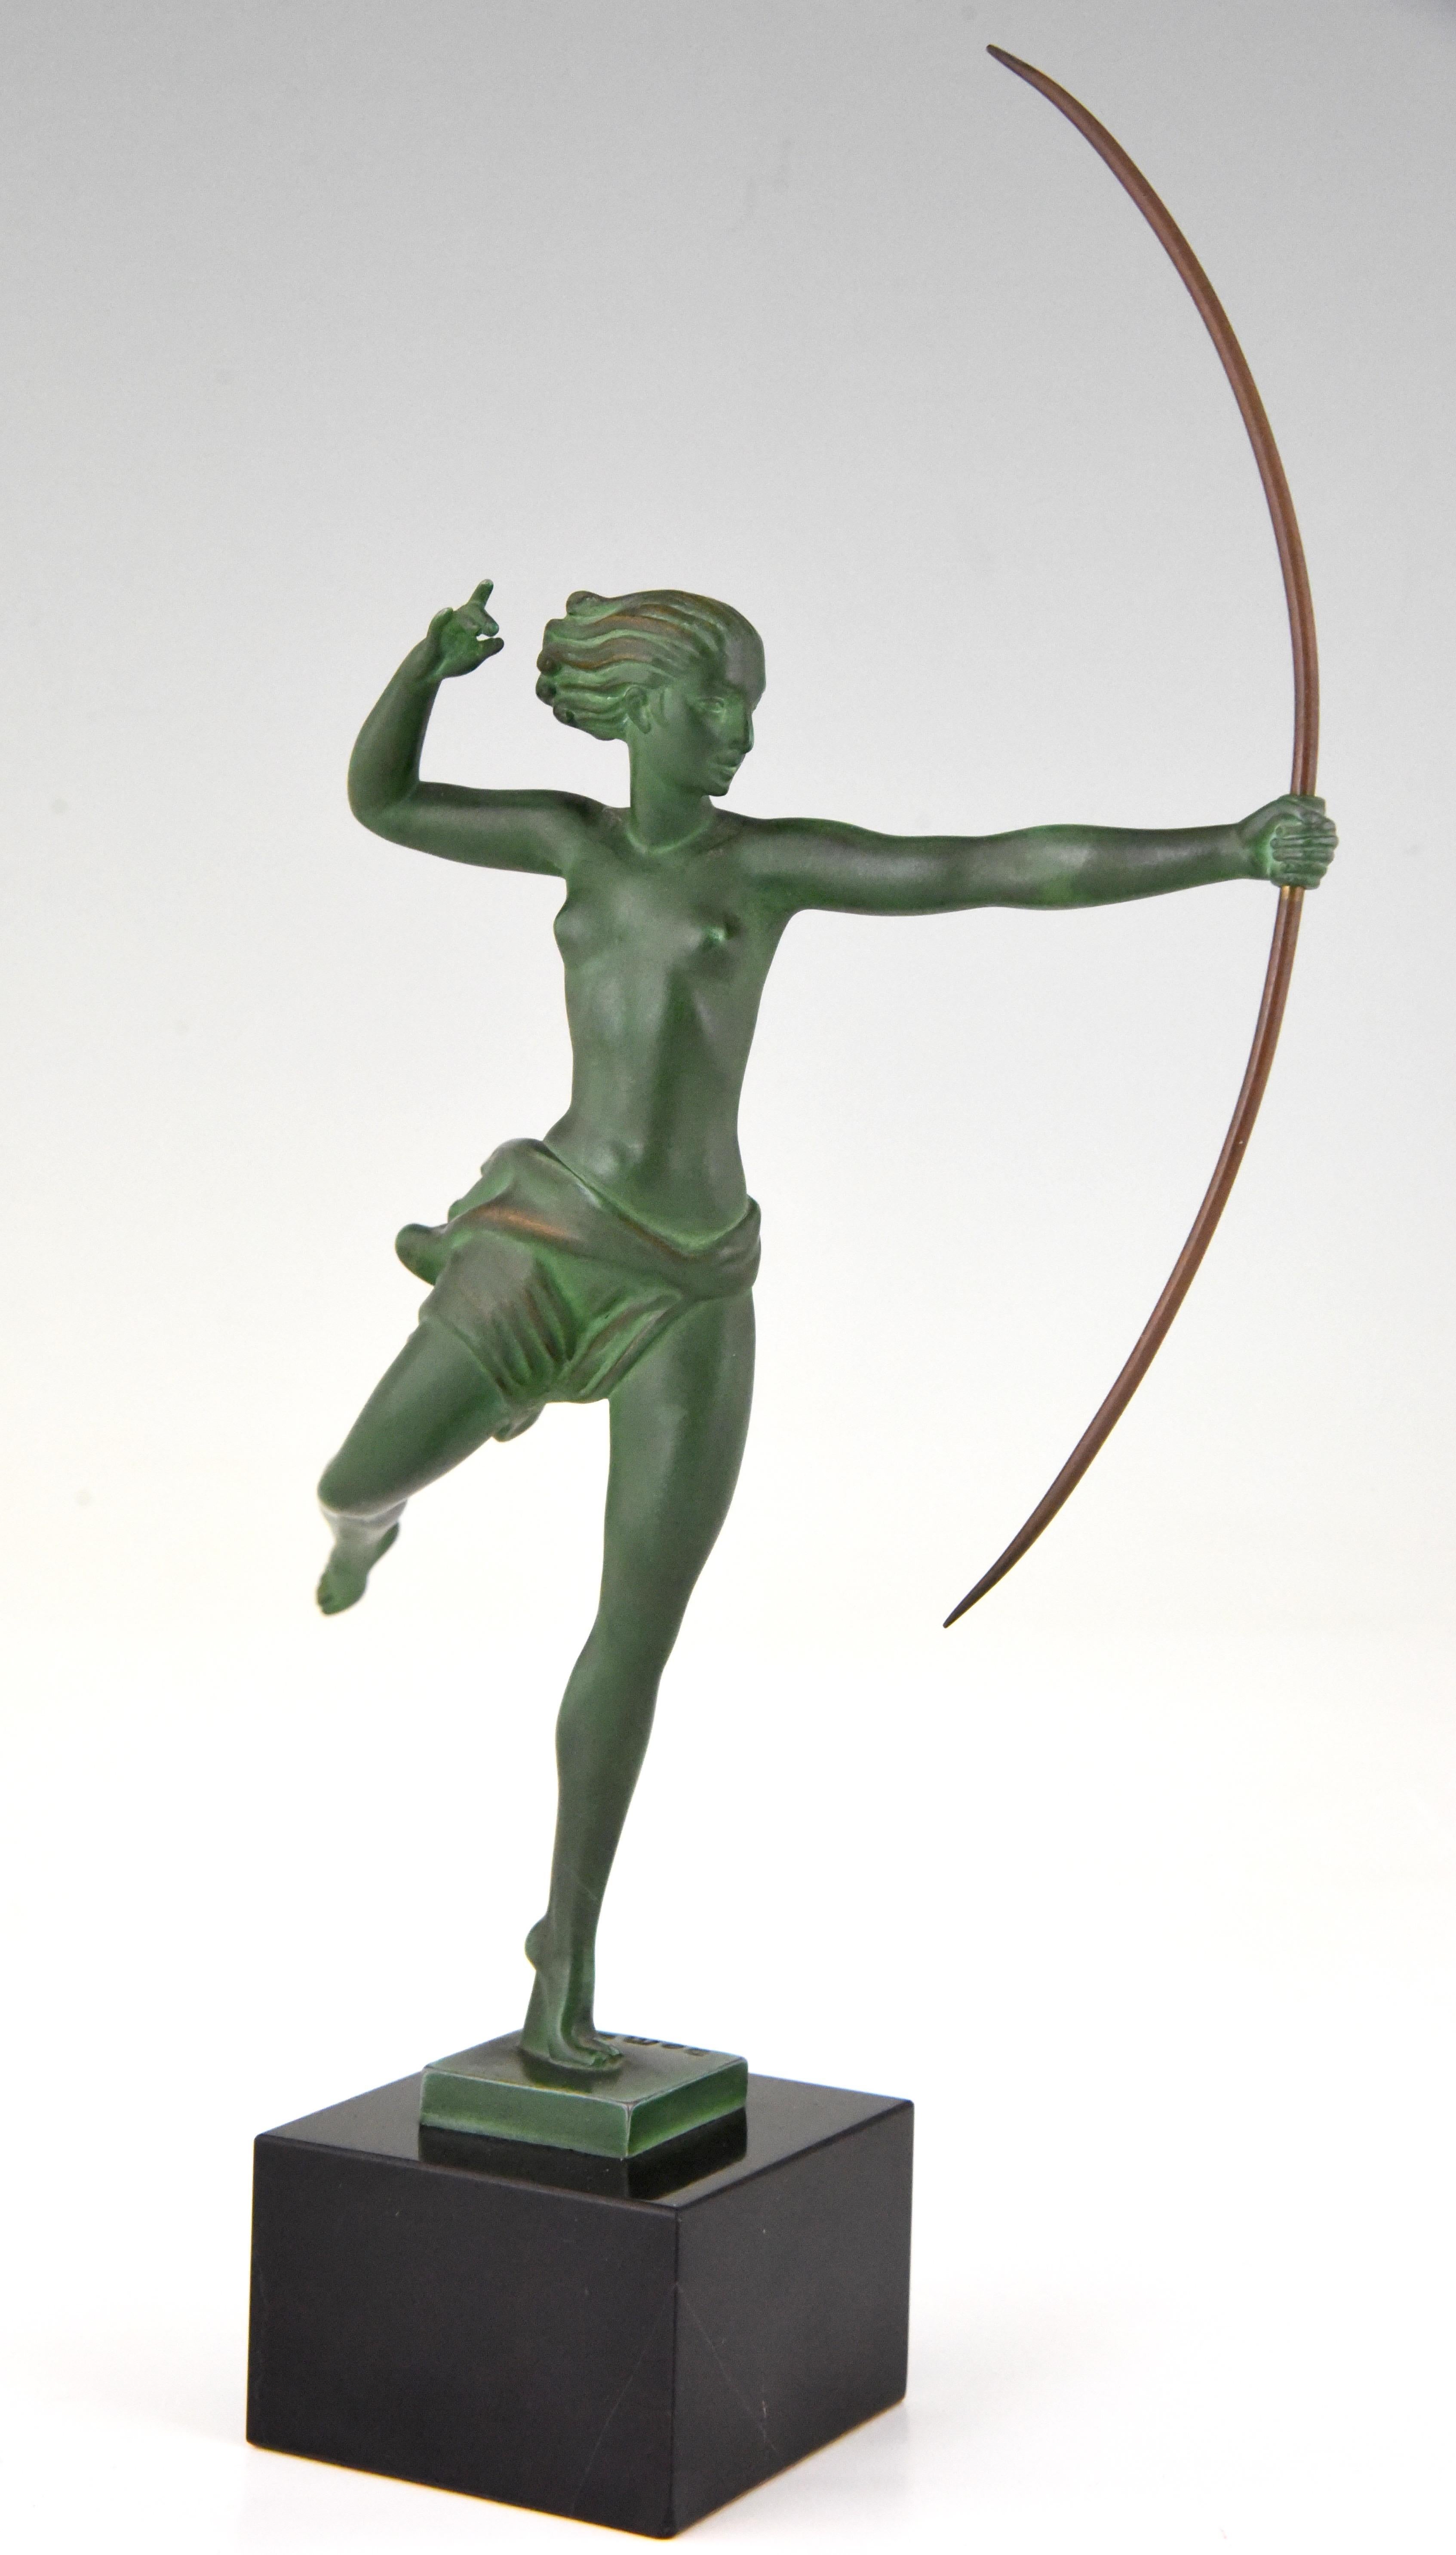 Elegant Art Deco sculpture of a standing female nude with bow, Atalante. By the French artist Jean de Marco, cast by Max Le Verrier.
The figure has a green patina and stands on a fine Belgian black marble base. 

“The dictionary of sculptors in